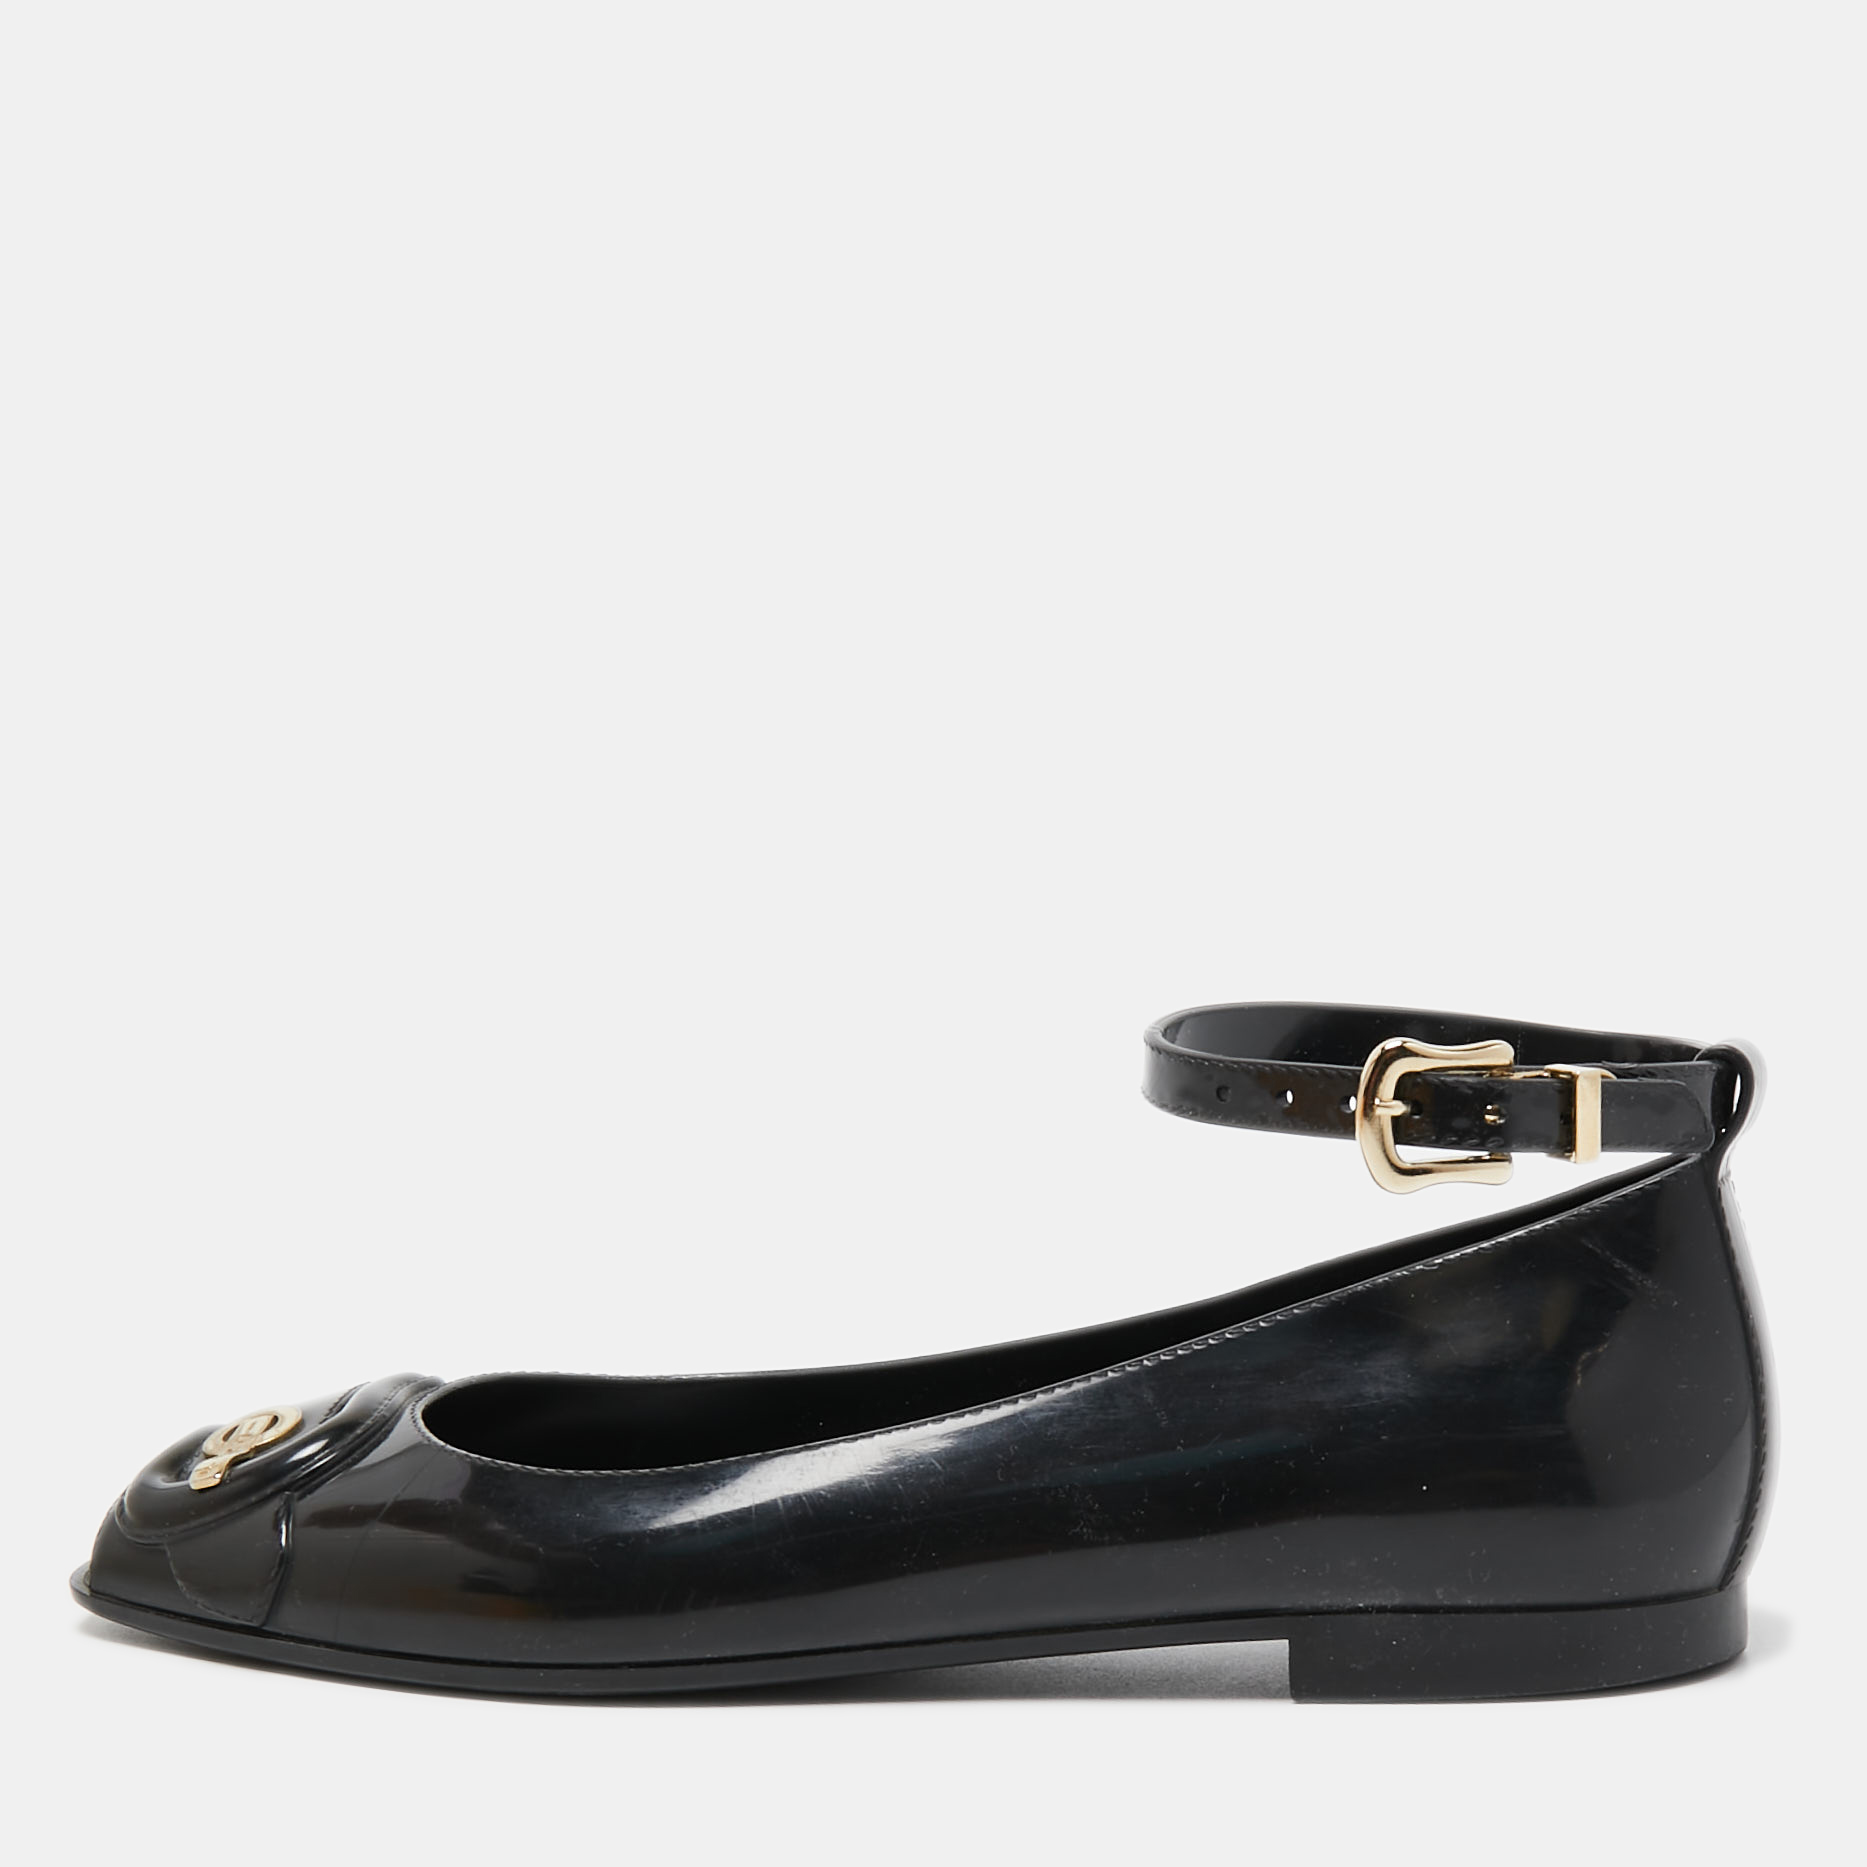 Pre-owned Fendi Black Jelly Buckle Ankle Strap Flats Size 36